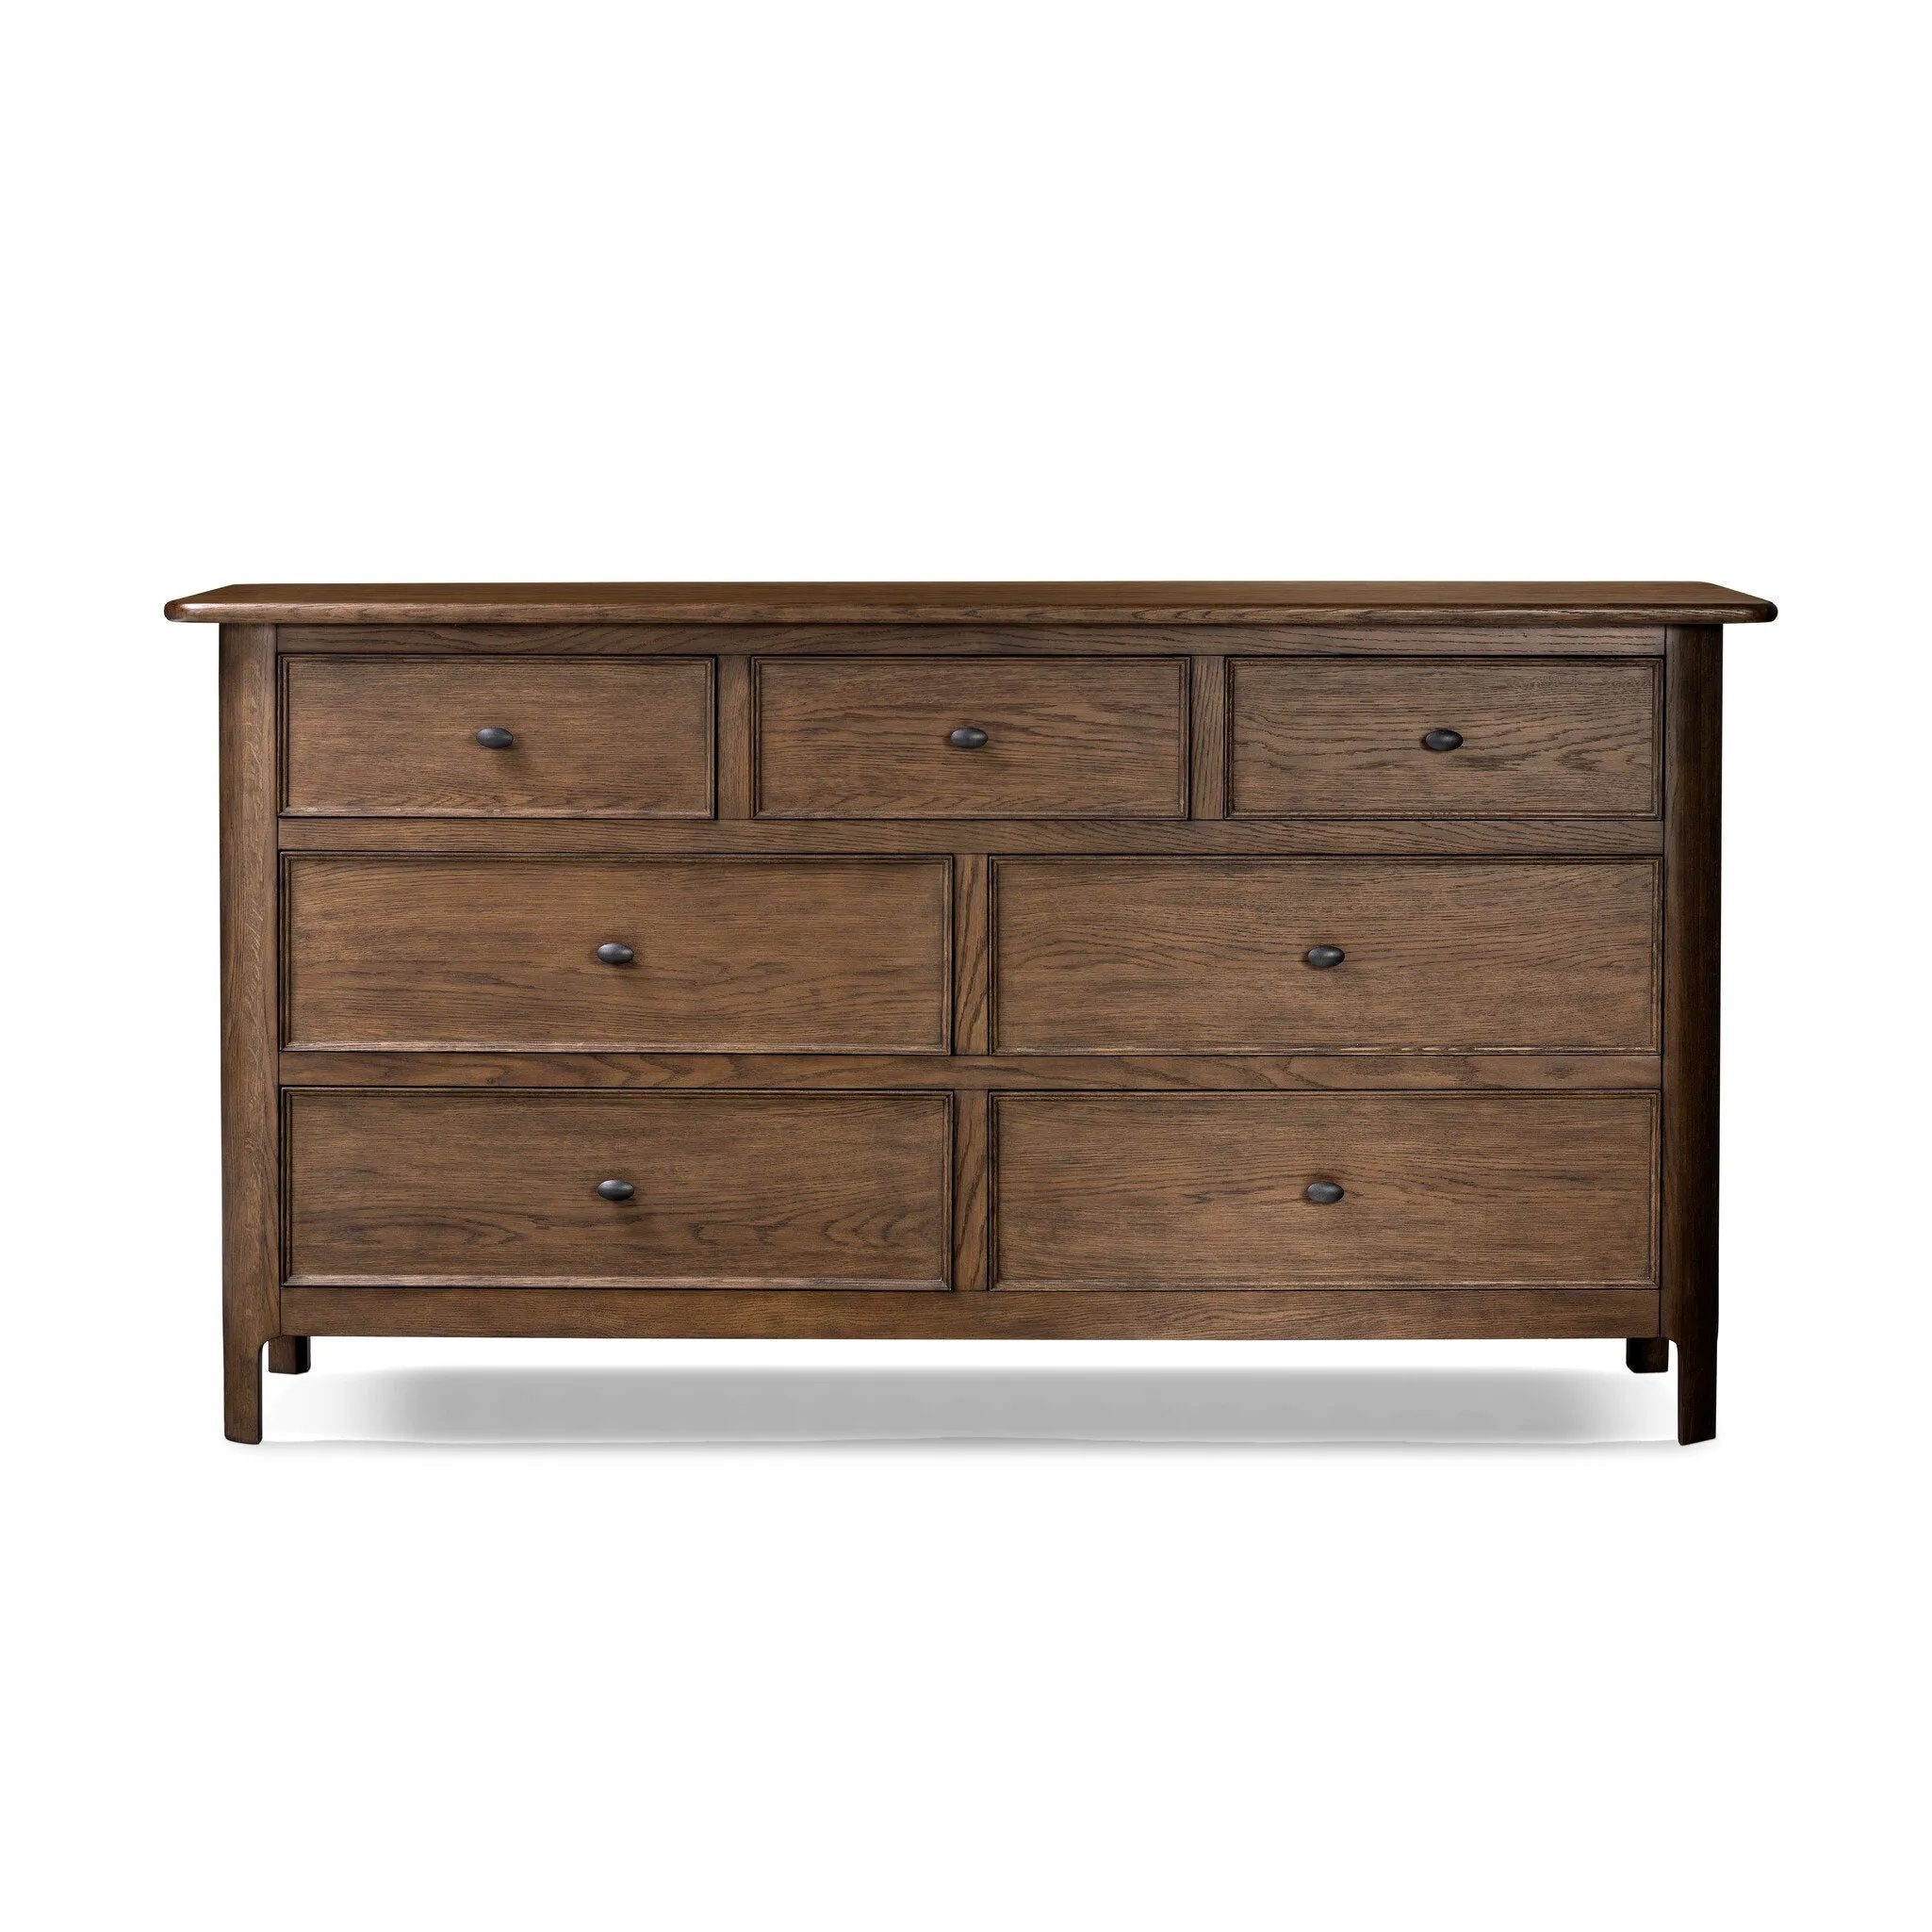 Like an heirloom dresser with three smaller drawers up top, this aged oak design has room for it all. Detailed with an overhang surface, carved edges top to bottom, angled legs and oval drawer pulls finished in dark gunmetal.Collection: Bolto Amethyst Home provides interior design, new home construction design consulting, vintage area rugs, and lighting in the Houston metro area.